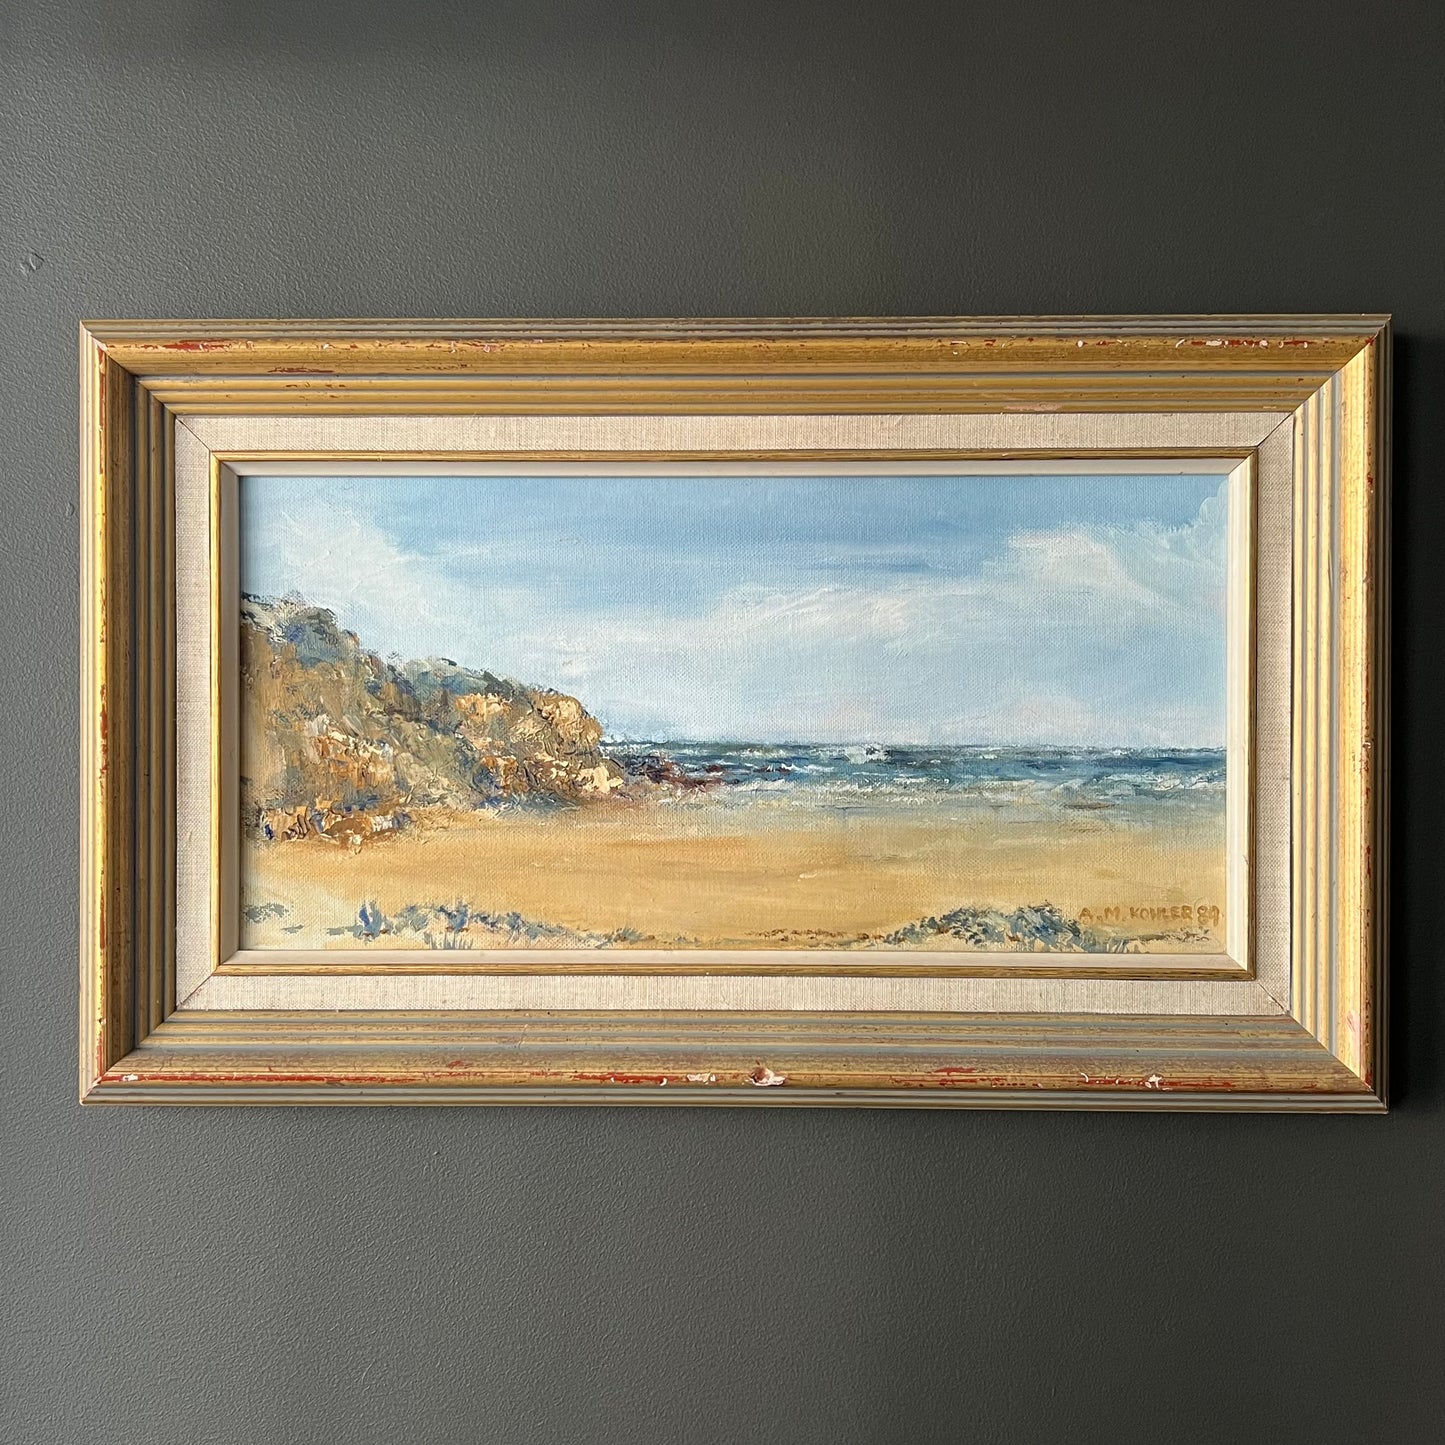 Vintage Landscape Oil Painting At the Beach